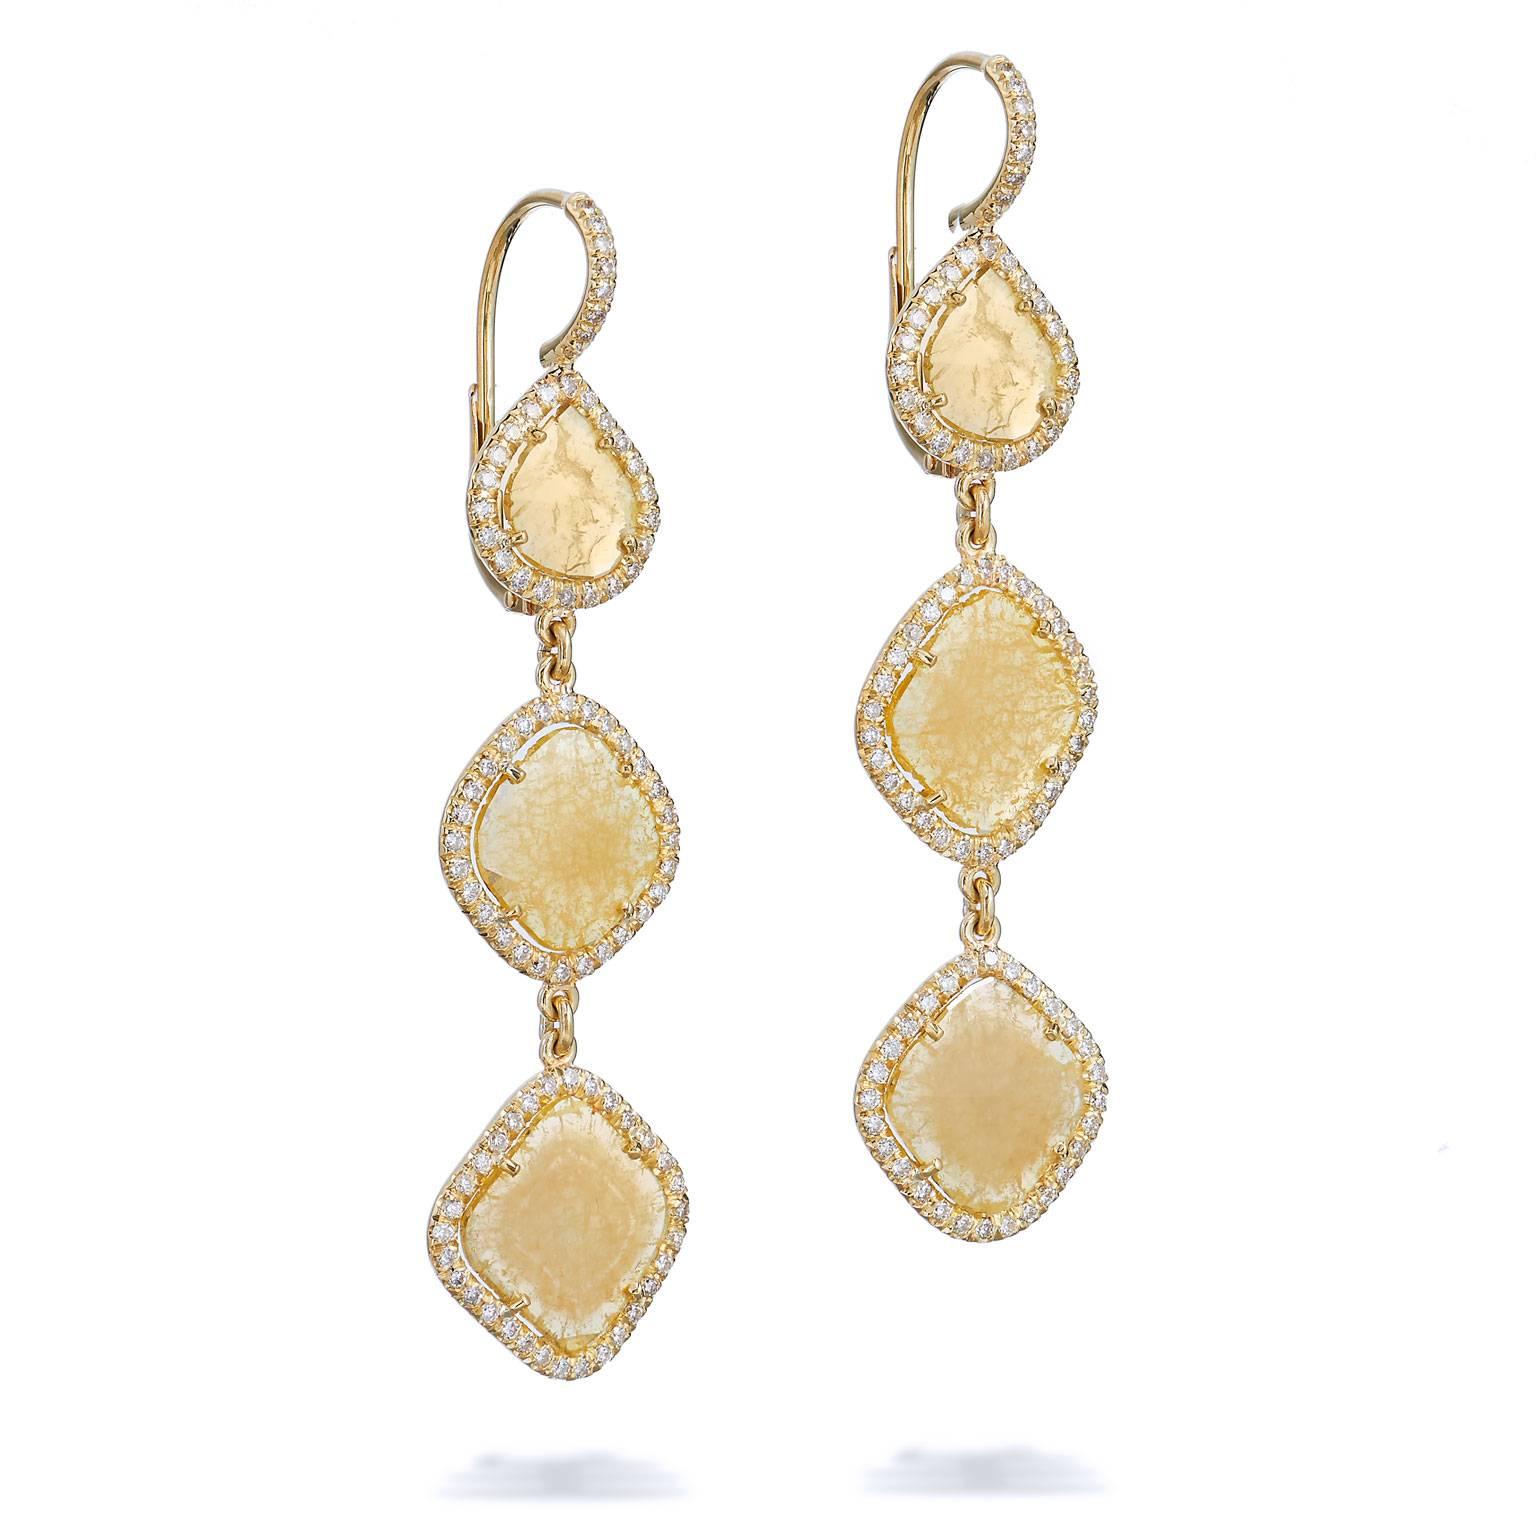 An original H and H design, these handcrafted 18 karat yellow gold multi-slice dangle earrings feature six fancy intense yellow diamond slices with a total weight of 4.39 carat. Slices provide an interesting presentation that allow the yellow